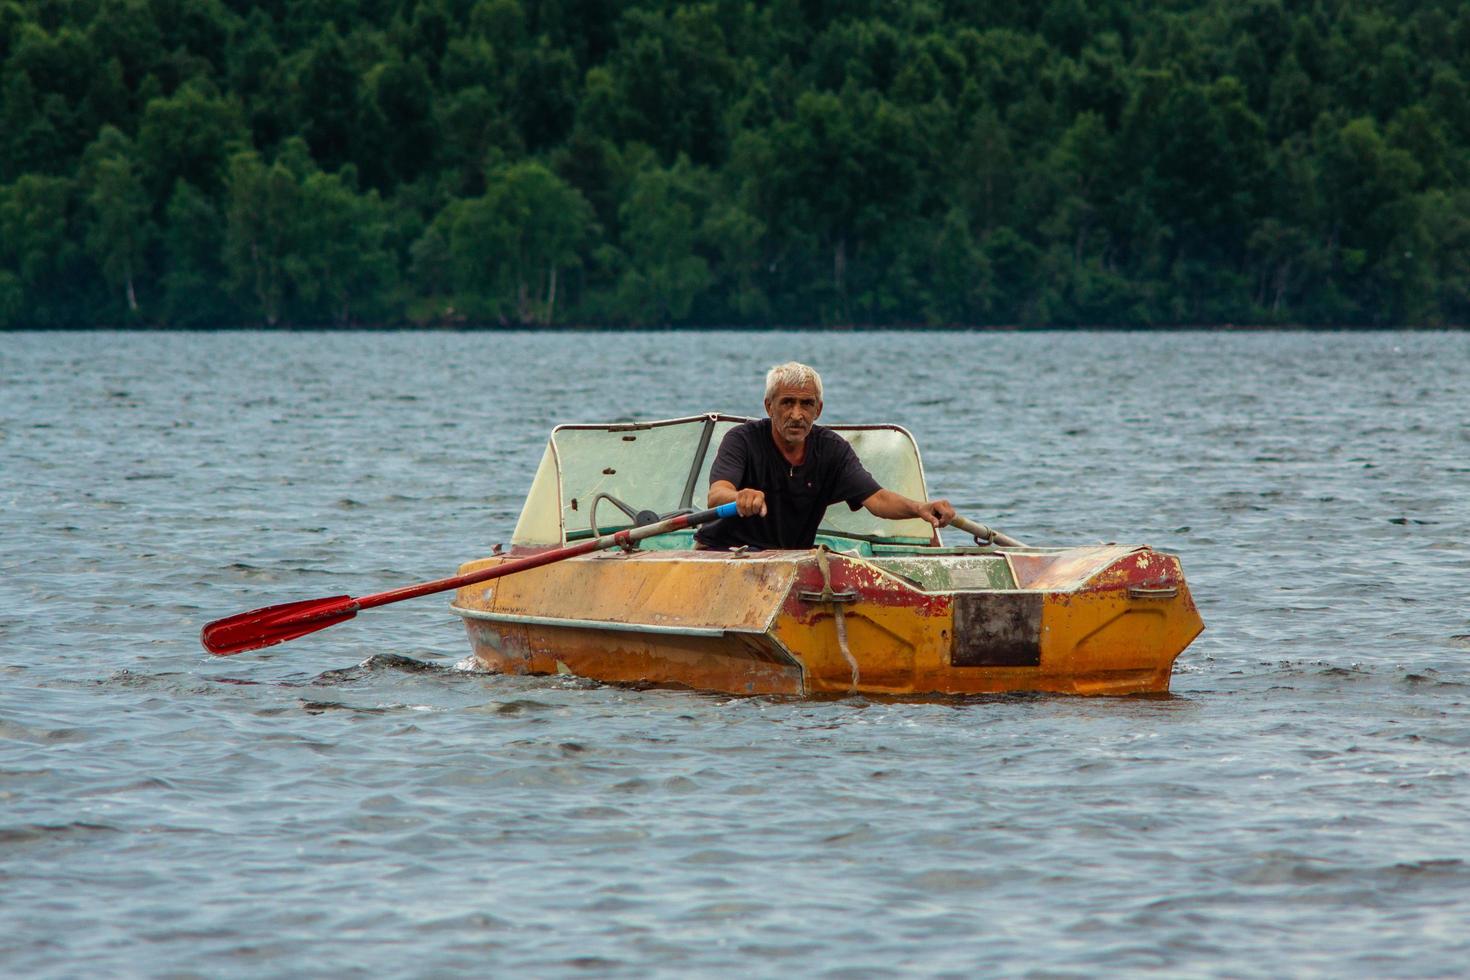 REPUBLIC OF KARELIA, RUSSIA - JULY 2, 2013, Old gray-haired tanned man sailing on boat with paddles on karelian lake. photo